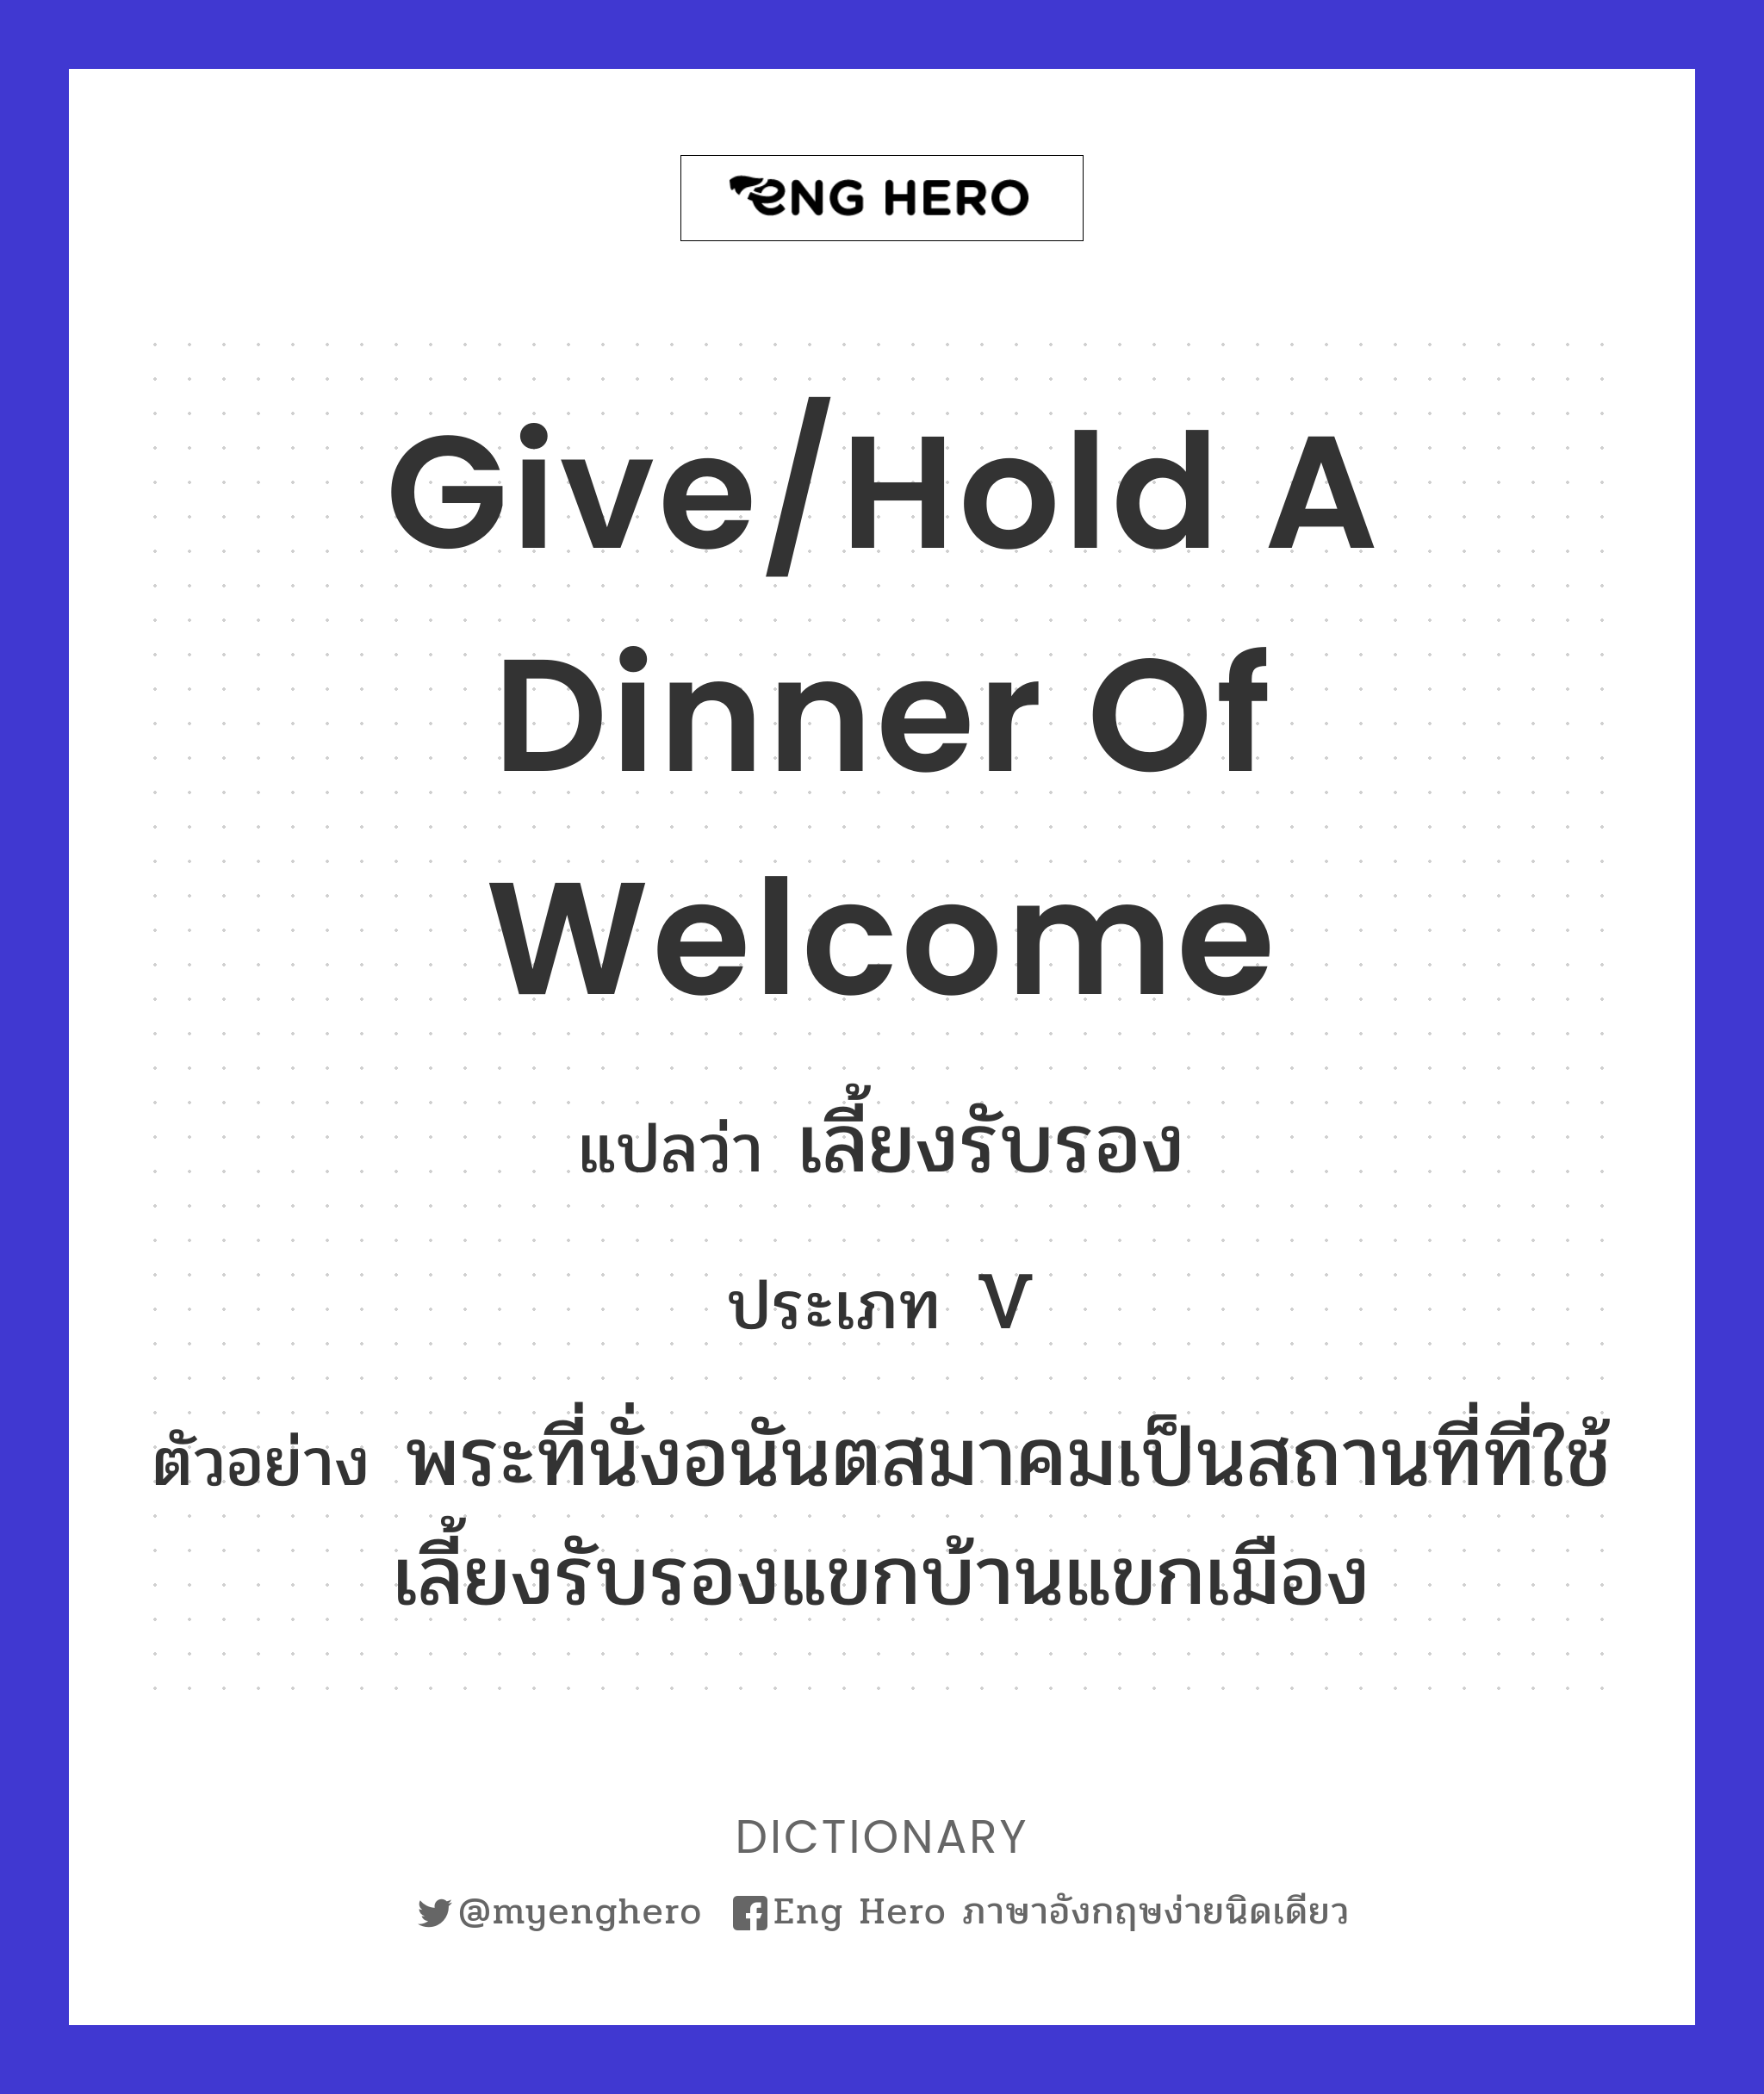 give/hold a dinner of welcome